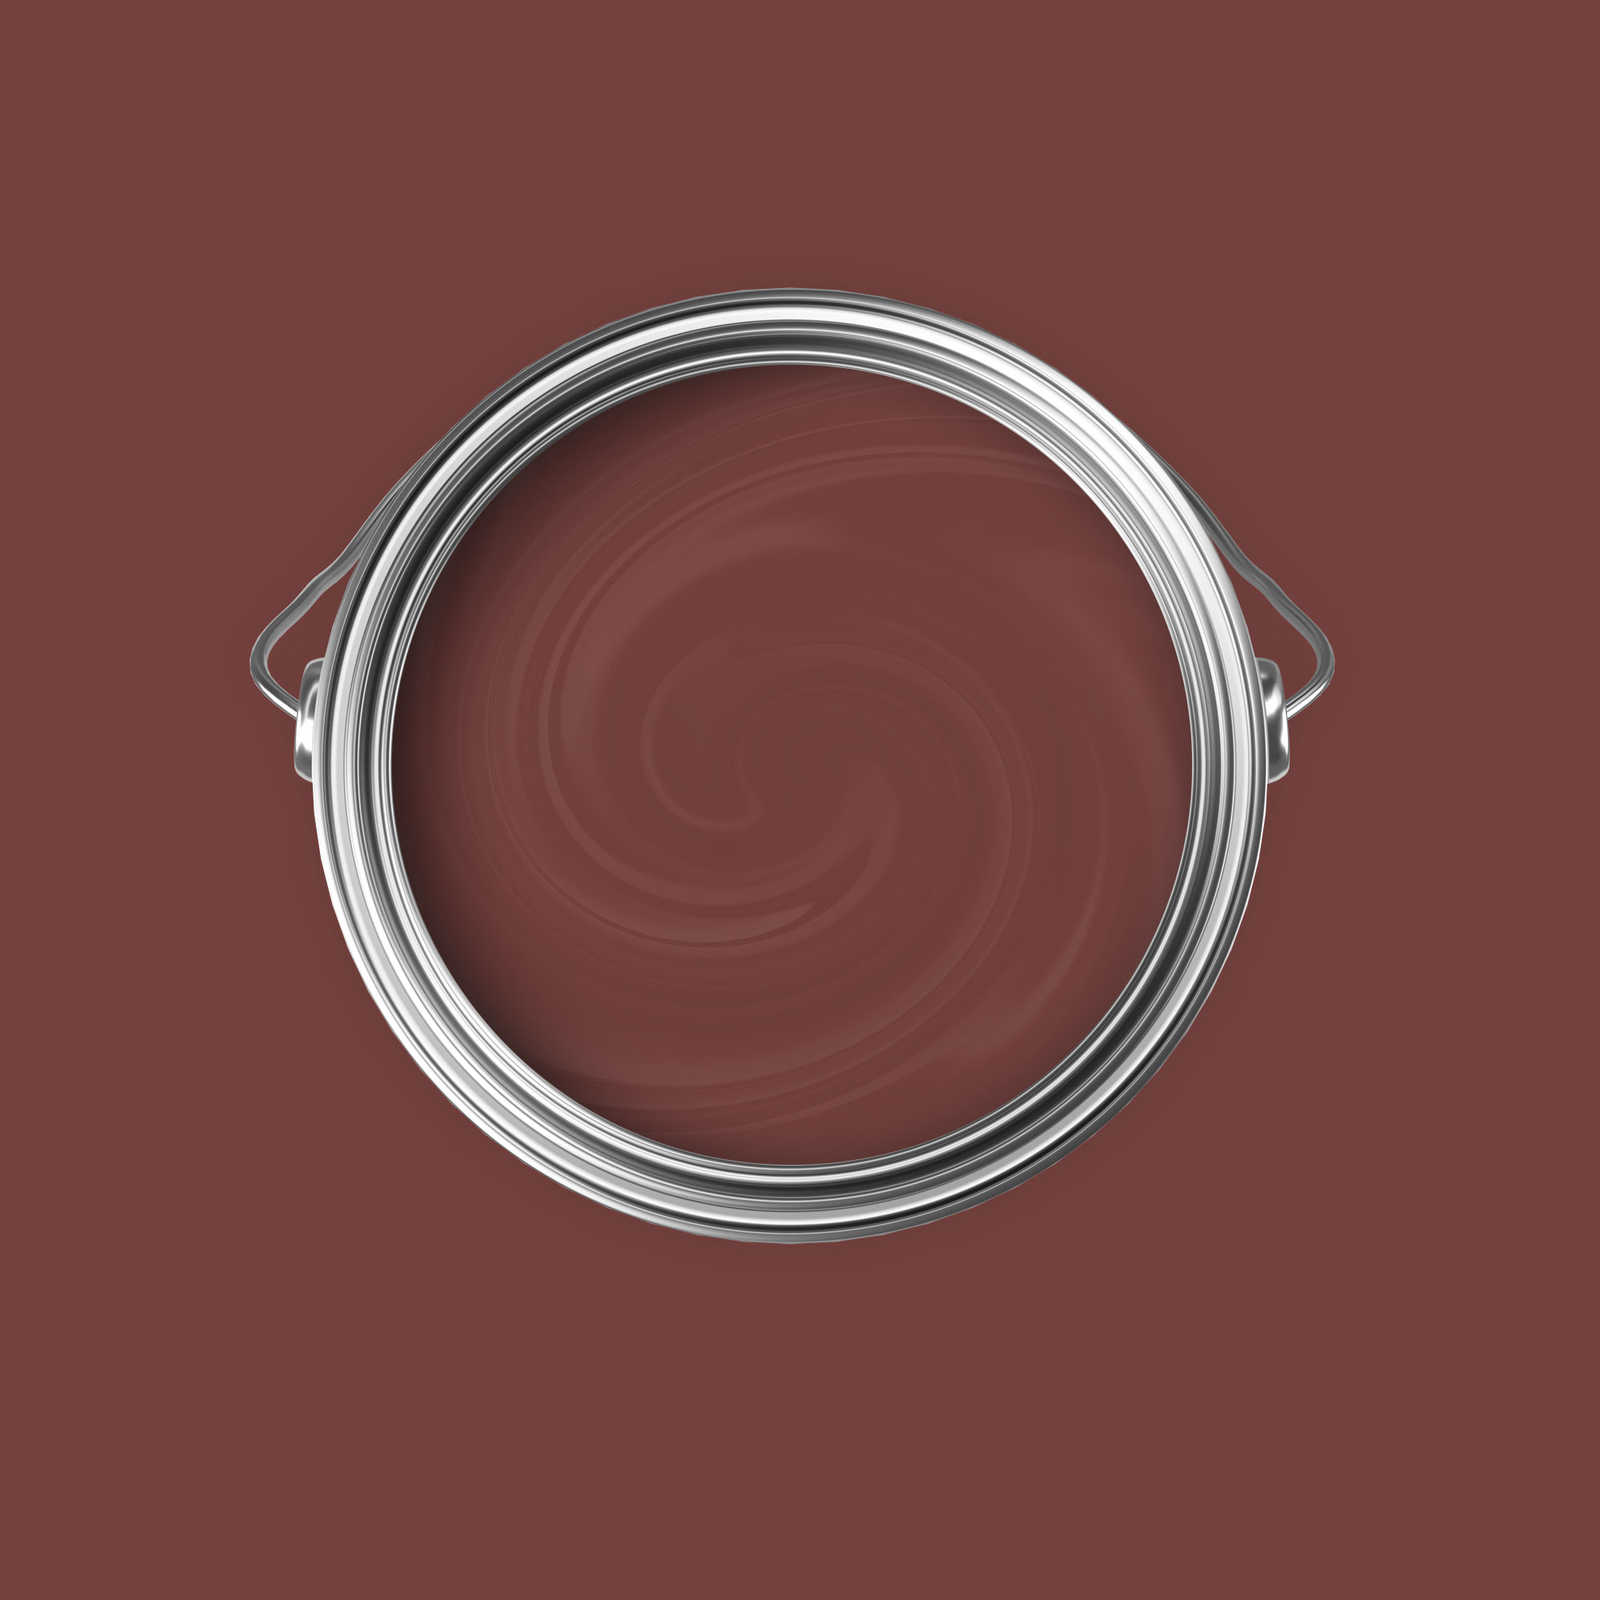             Premium Wall Paint noble chestnut red »Luxury Lipstick« NW1007 – 5 litre
        